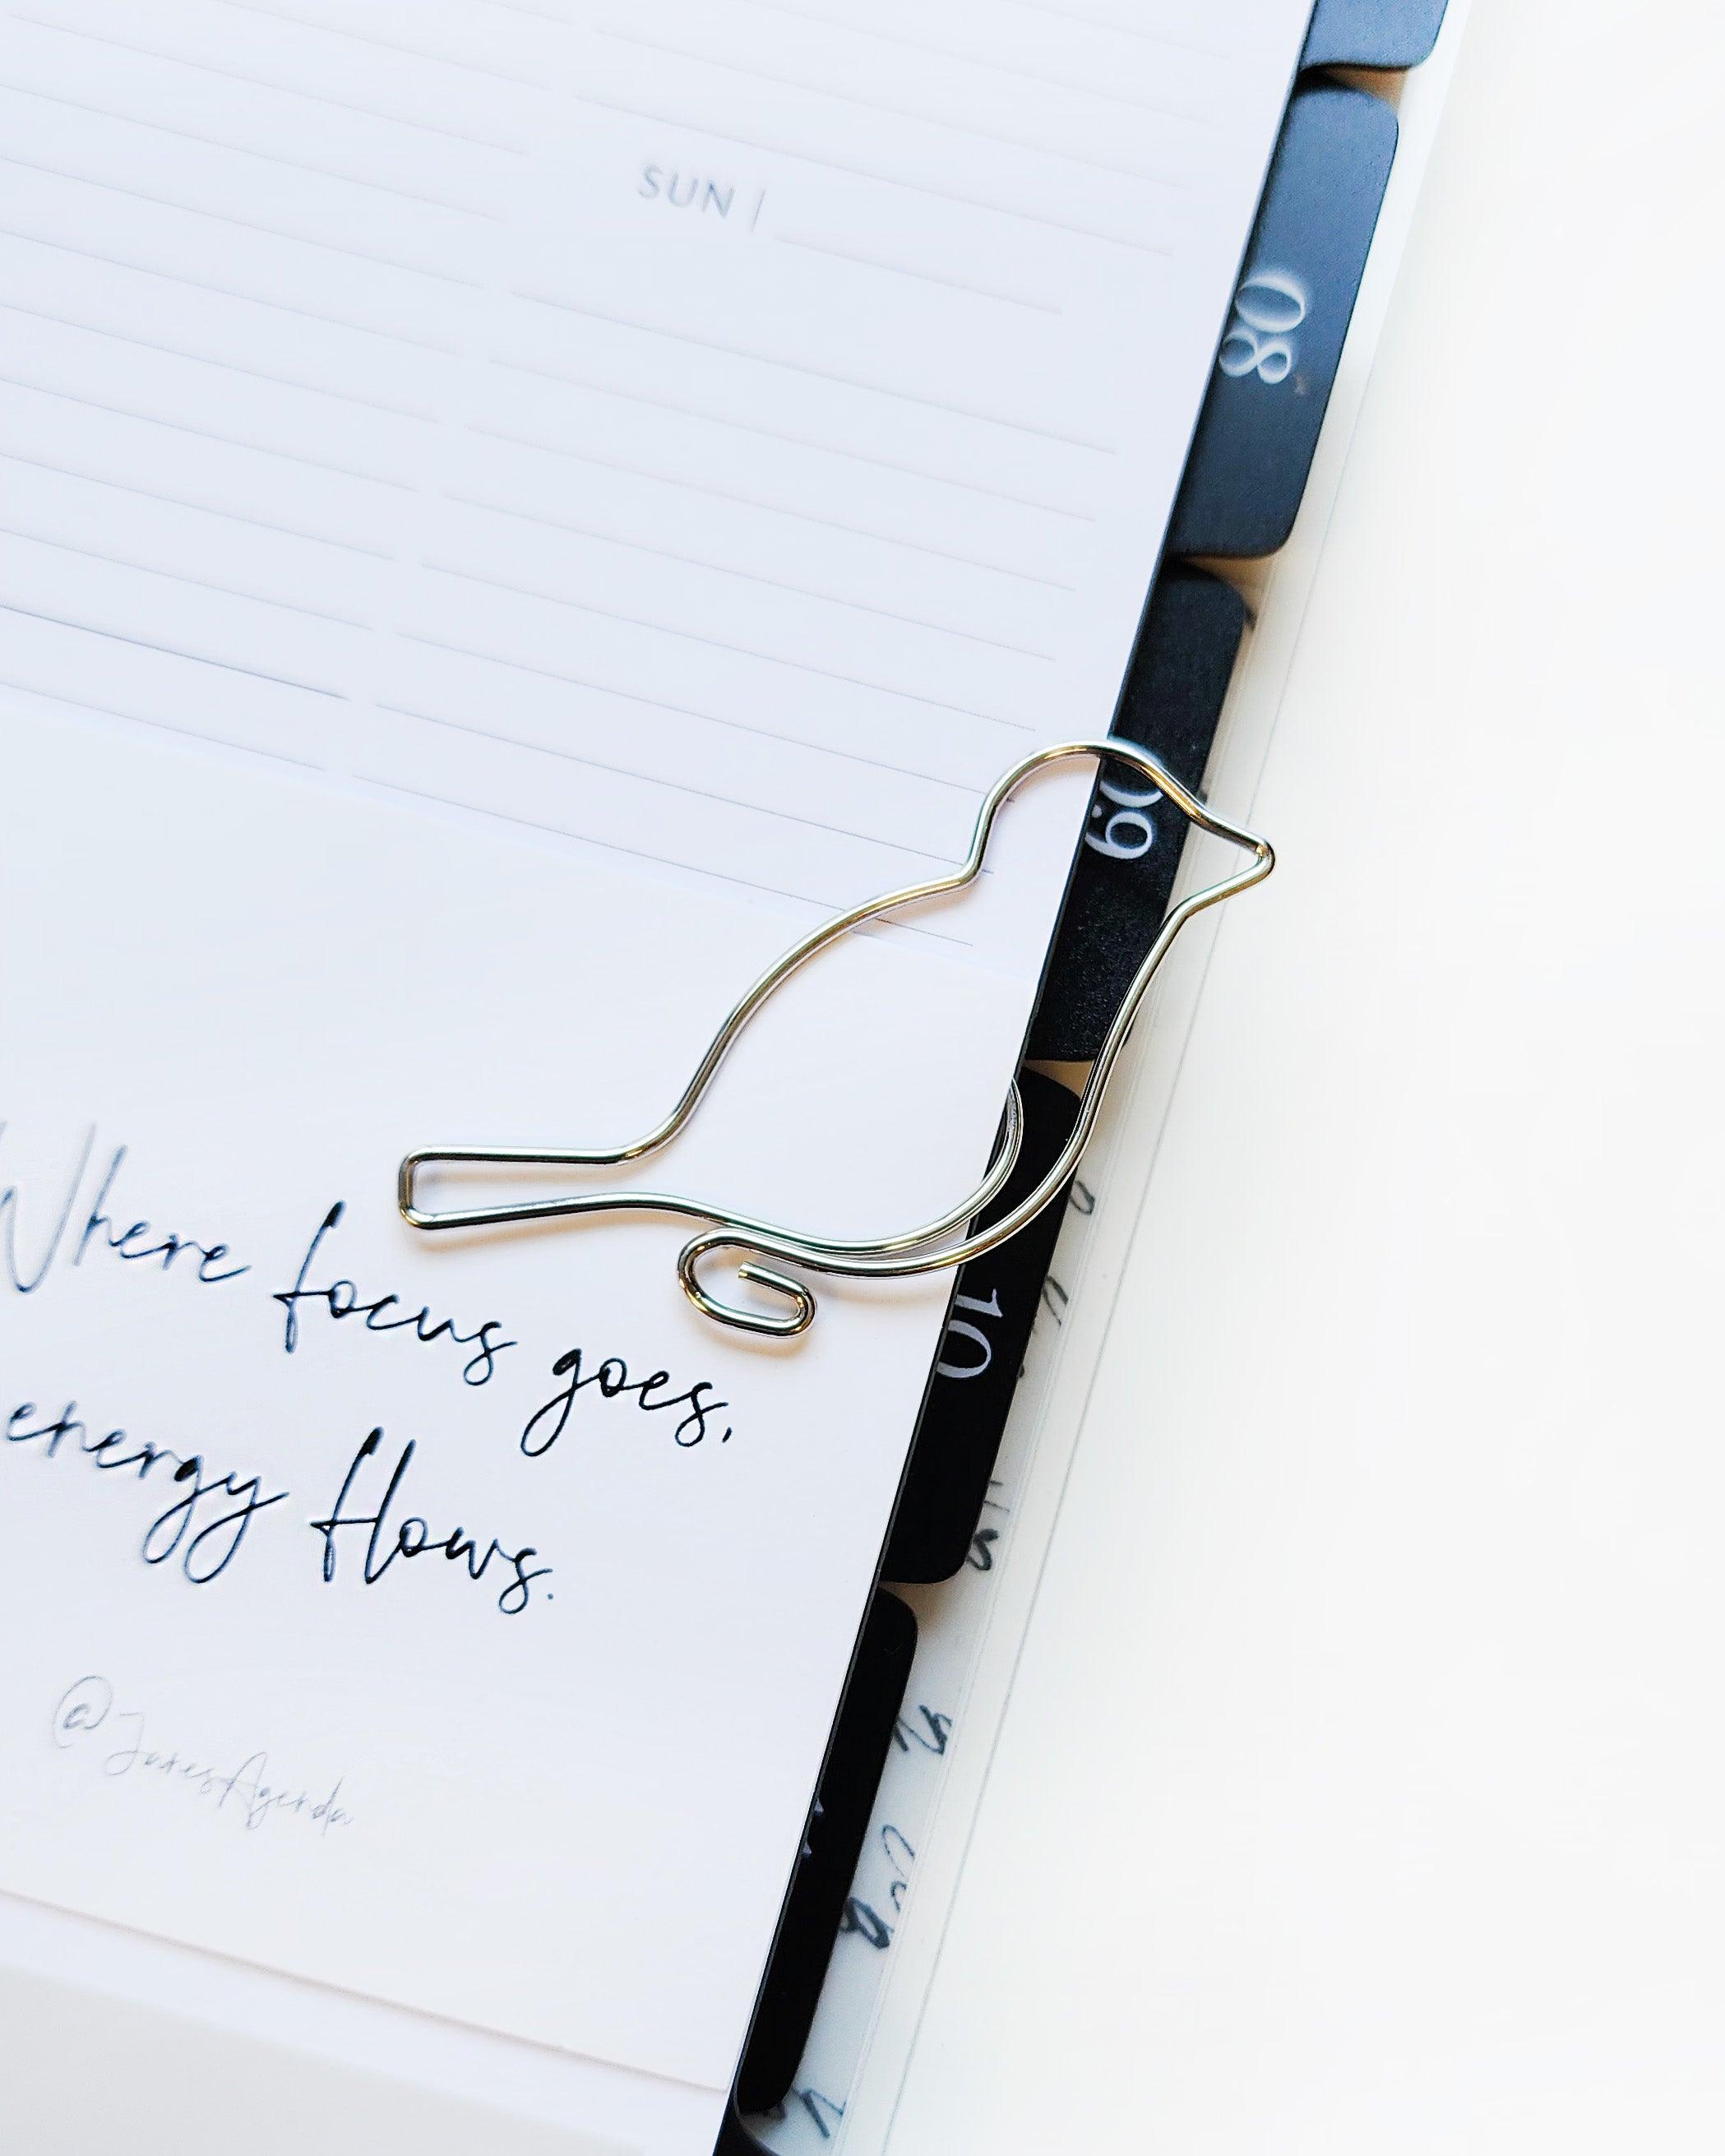 Bird shaped paperclips for clipping notes and papers to your notebook, planner, or to mark your page in a book from Jane's Agenda.